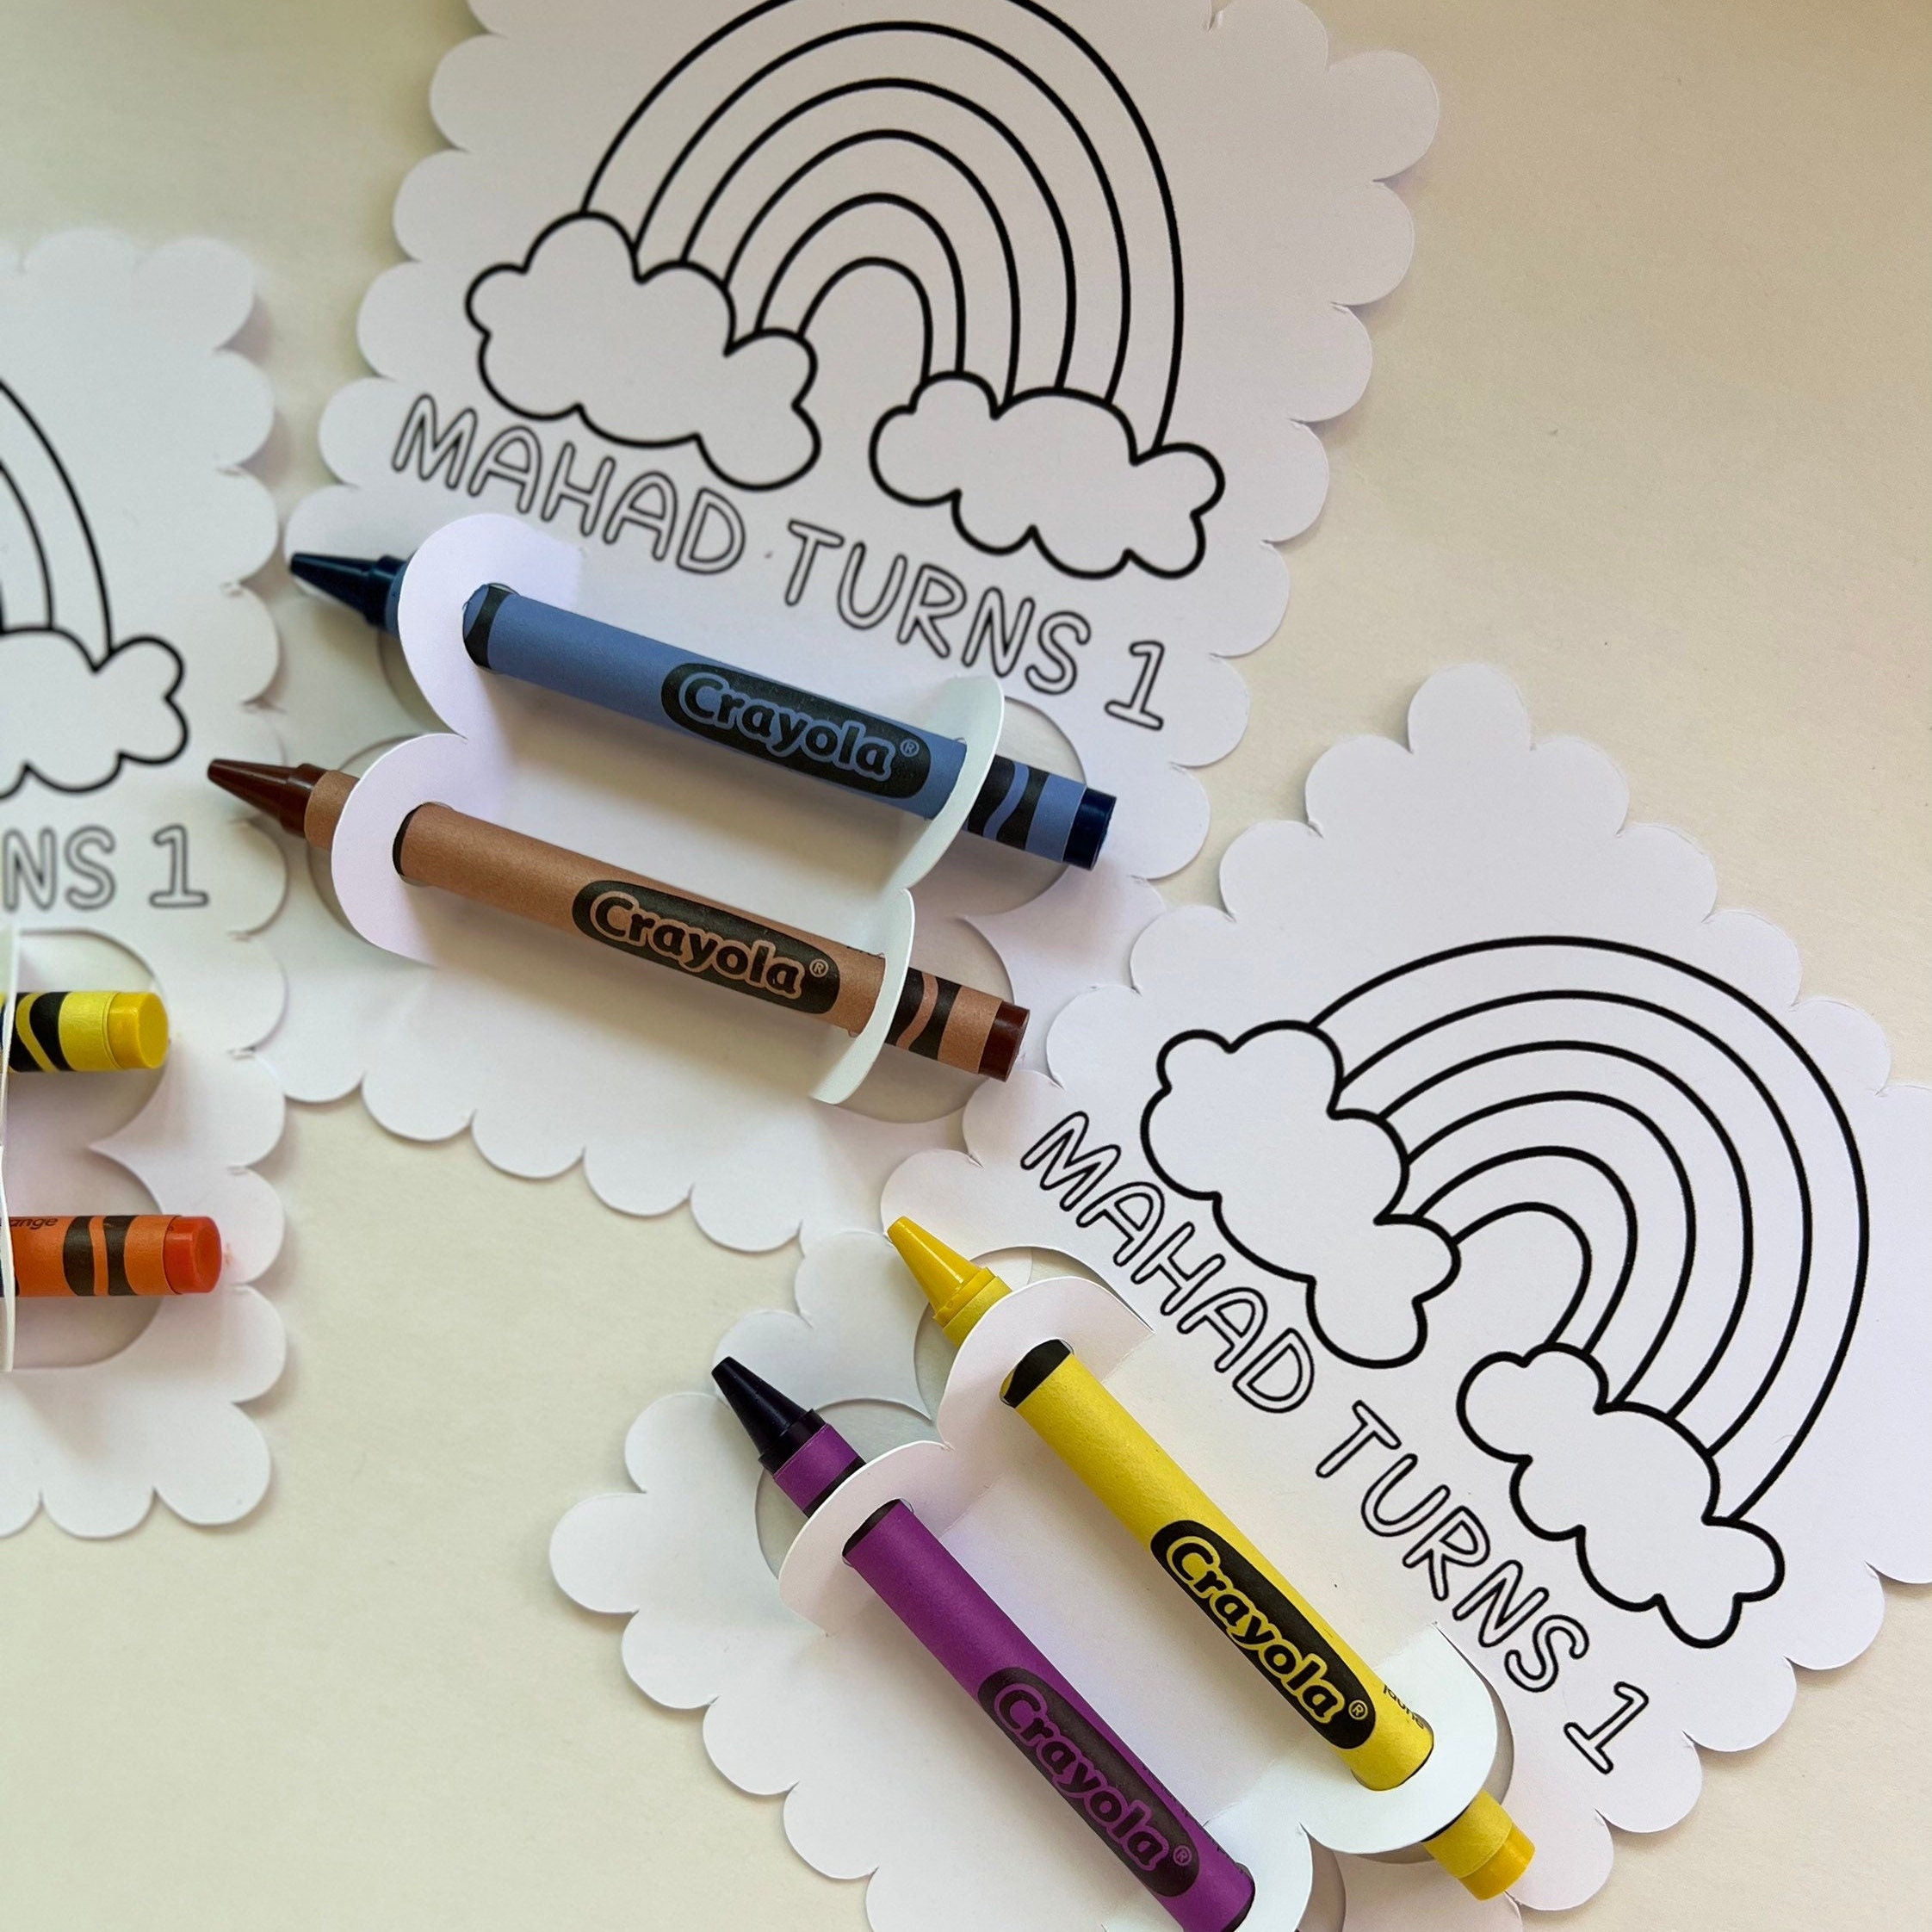 PERSONALIZED COLOURING PARTY FAVORS W/ 4pc CRAYONS – Special Occasions